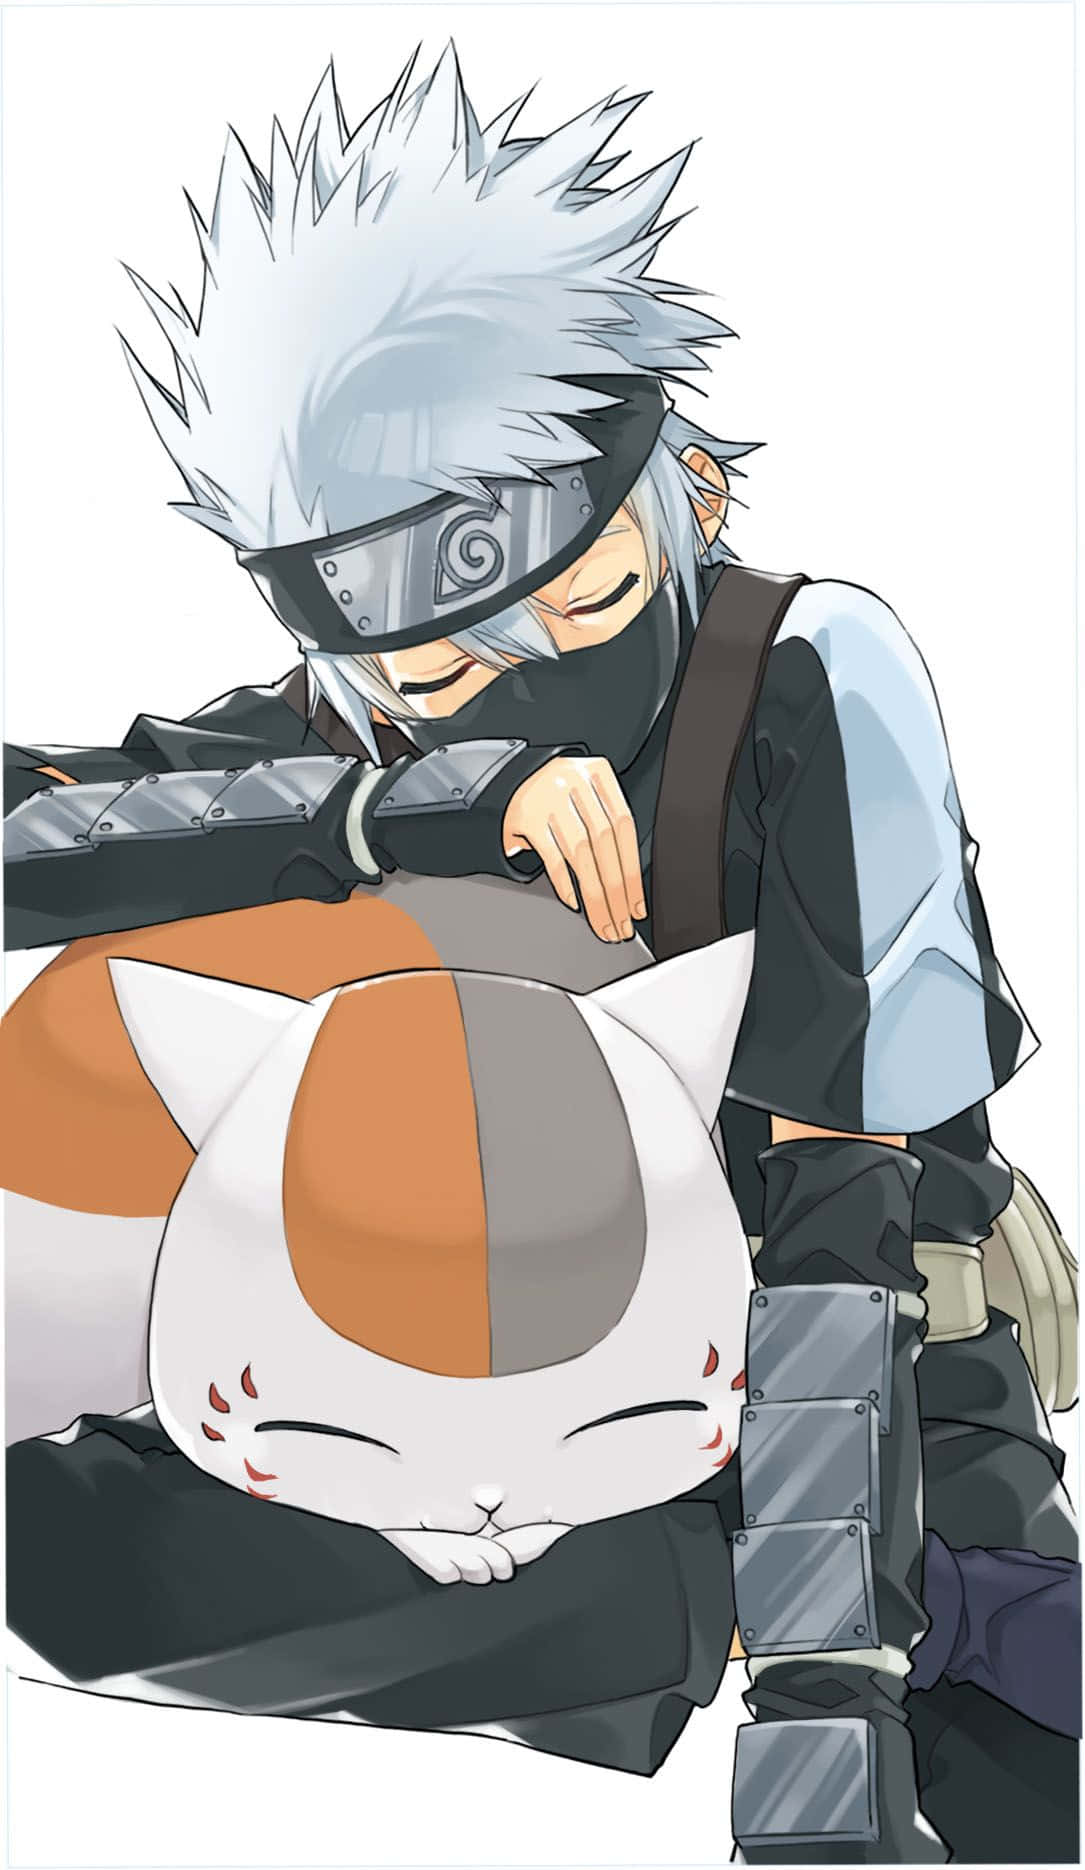 "Cuteness Overload! Check Out This Adorable Kakashi!" Wallpaper